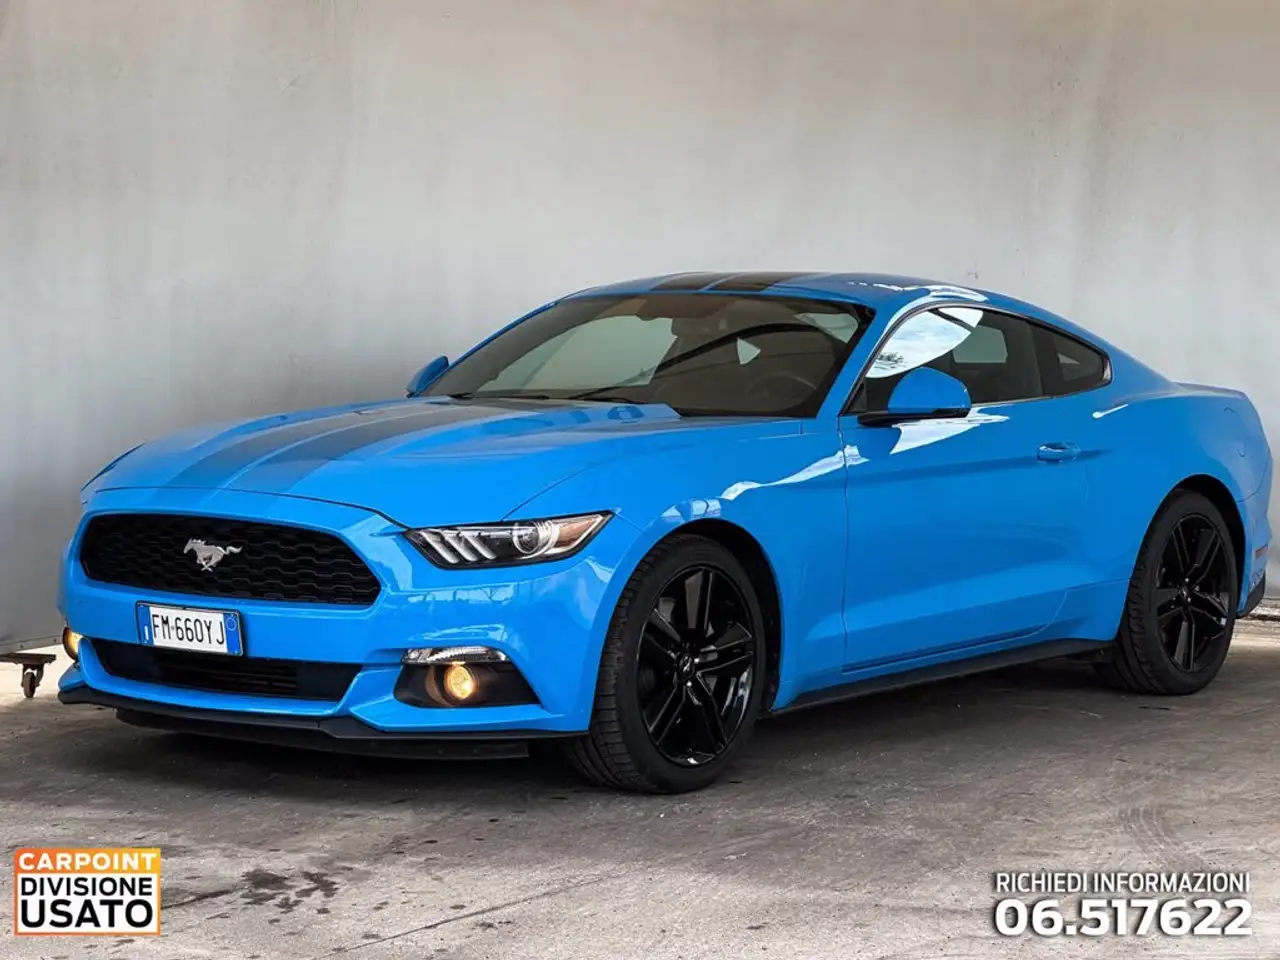 2018 - Ford Mustang Mustang Boîte automatique Coupé